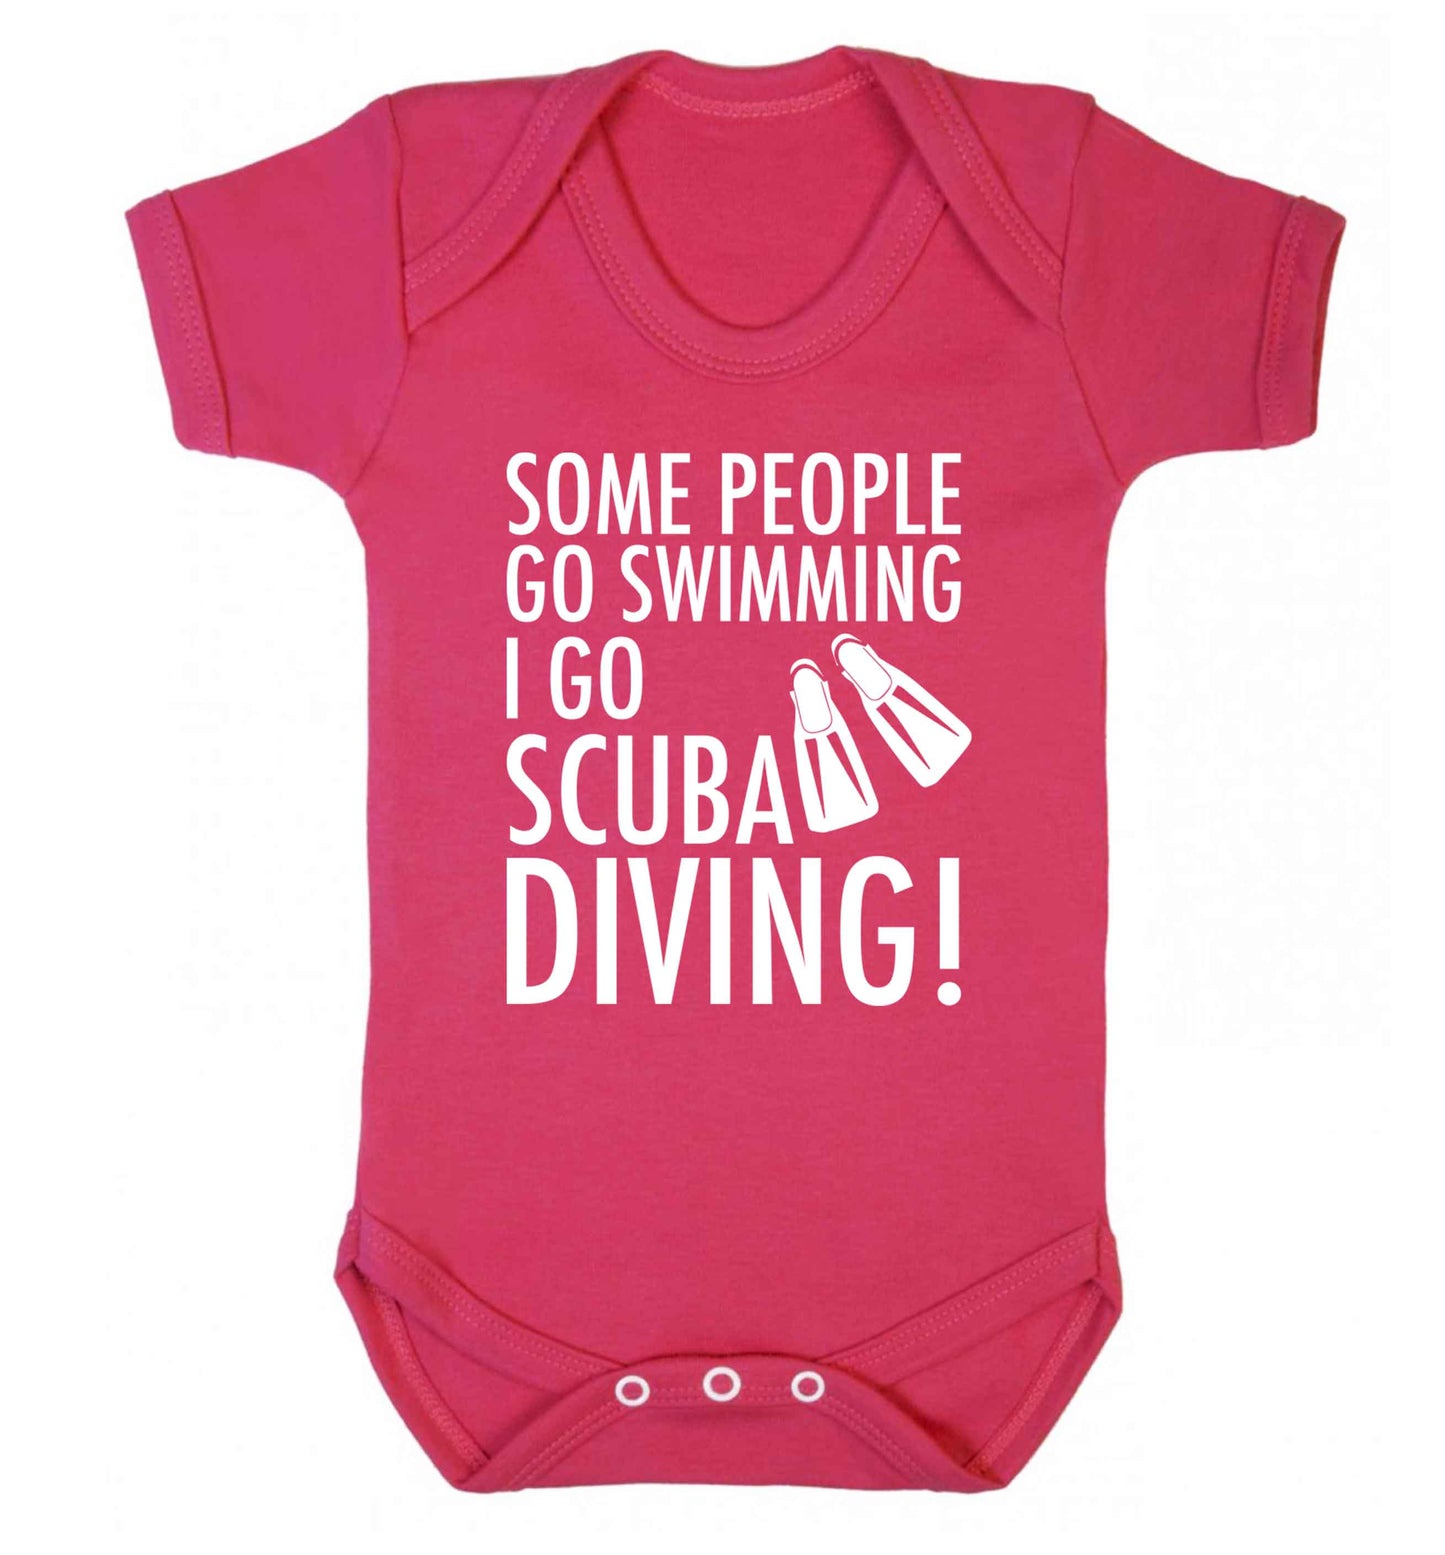 Some people go swimming I go scuba diving! Baby Vest dark pink 18-24 months